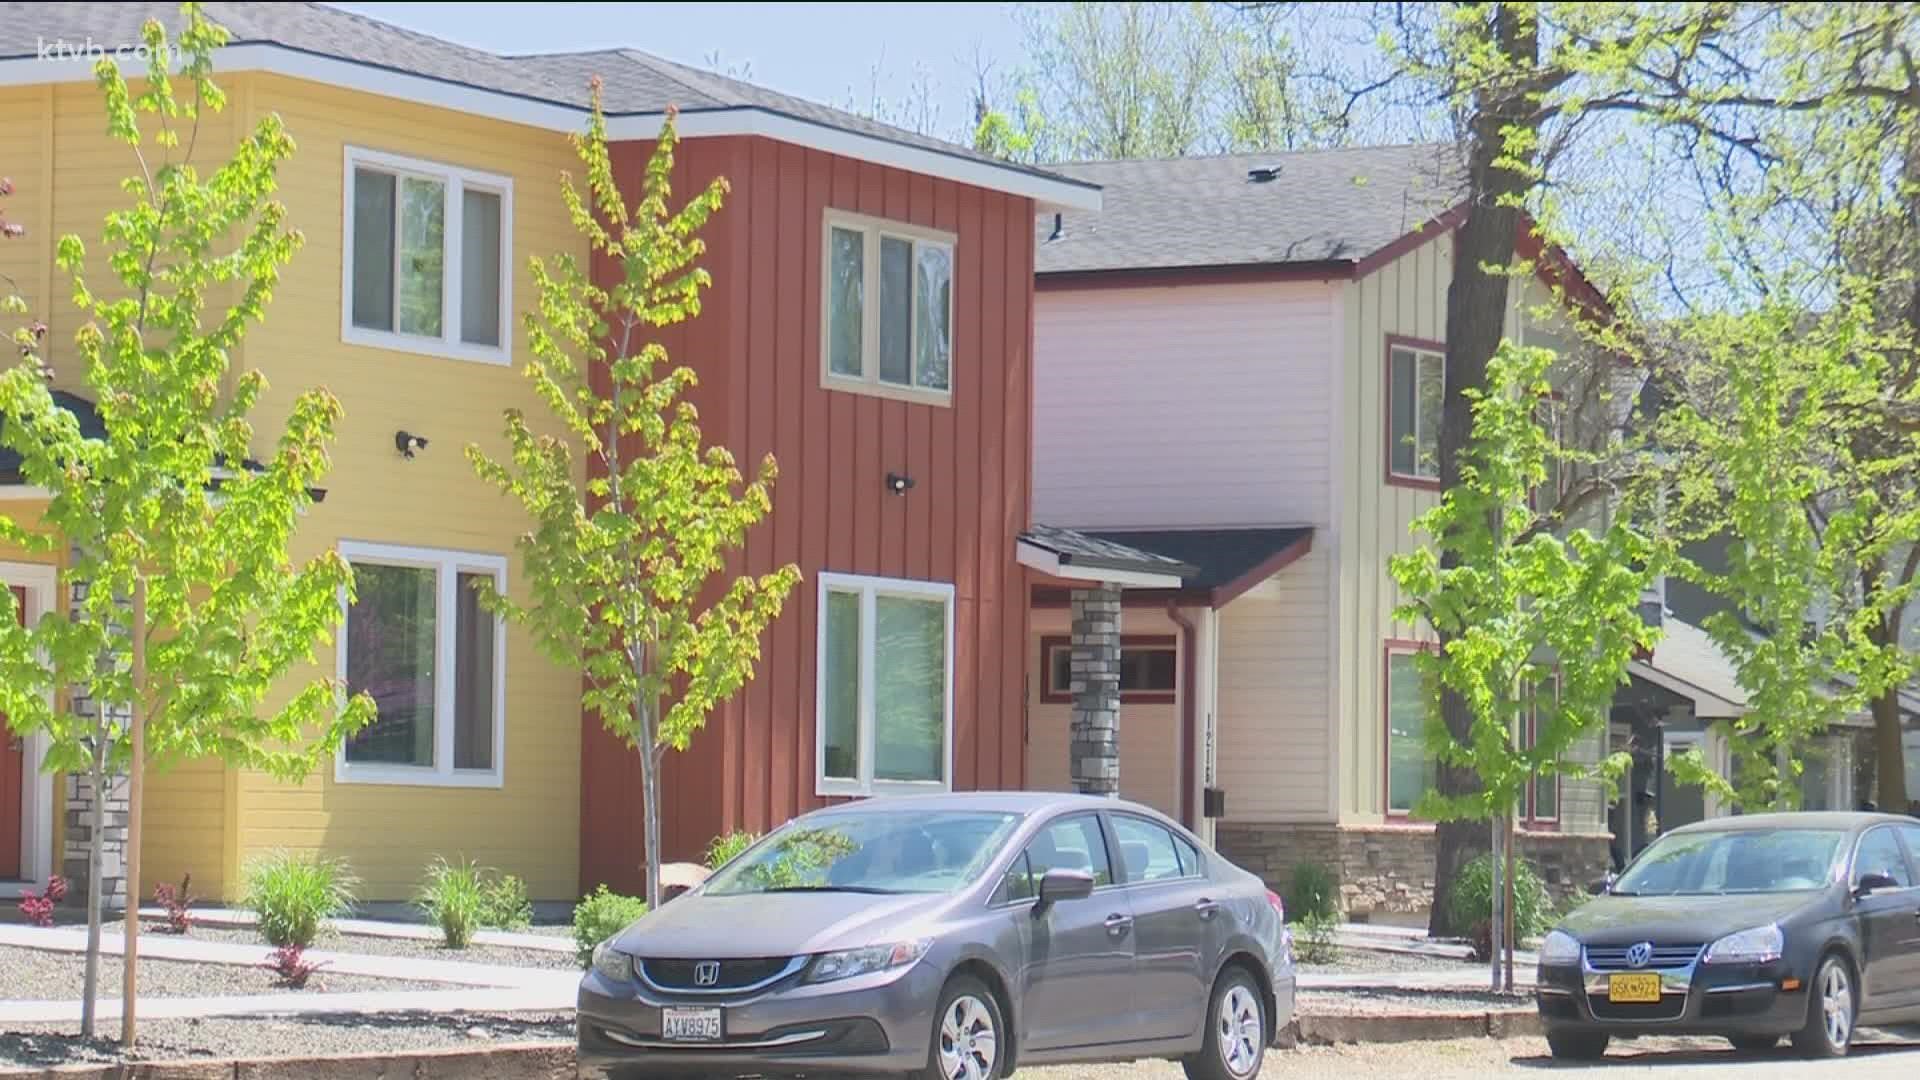 Boise Mayor Lauren McLean said the program seeks to focus first on those that need it most with more multi-family housing available within Boise budgets.